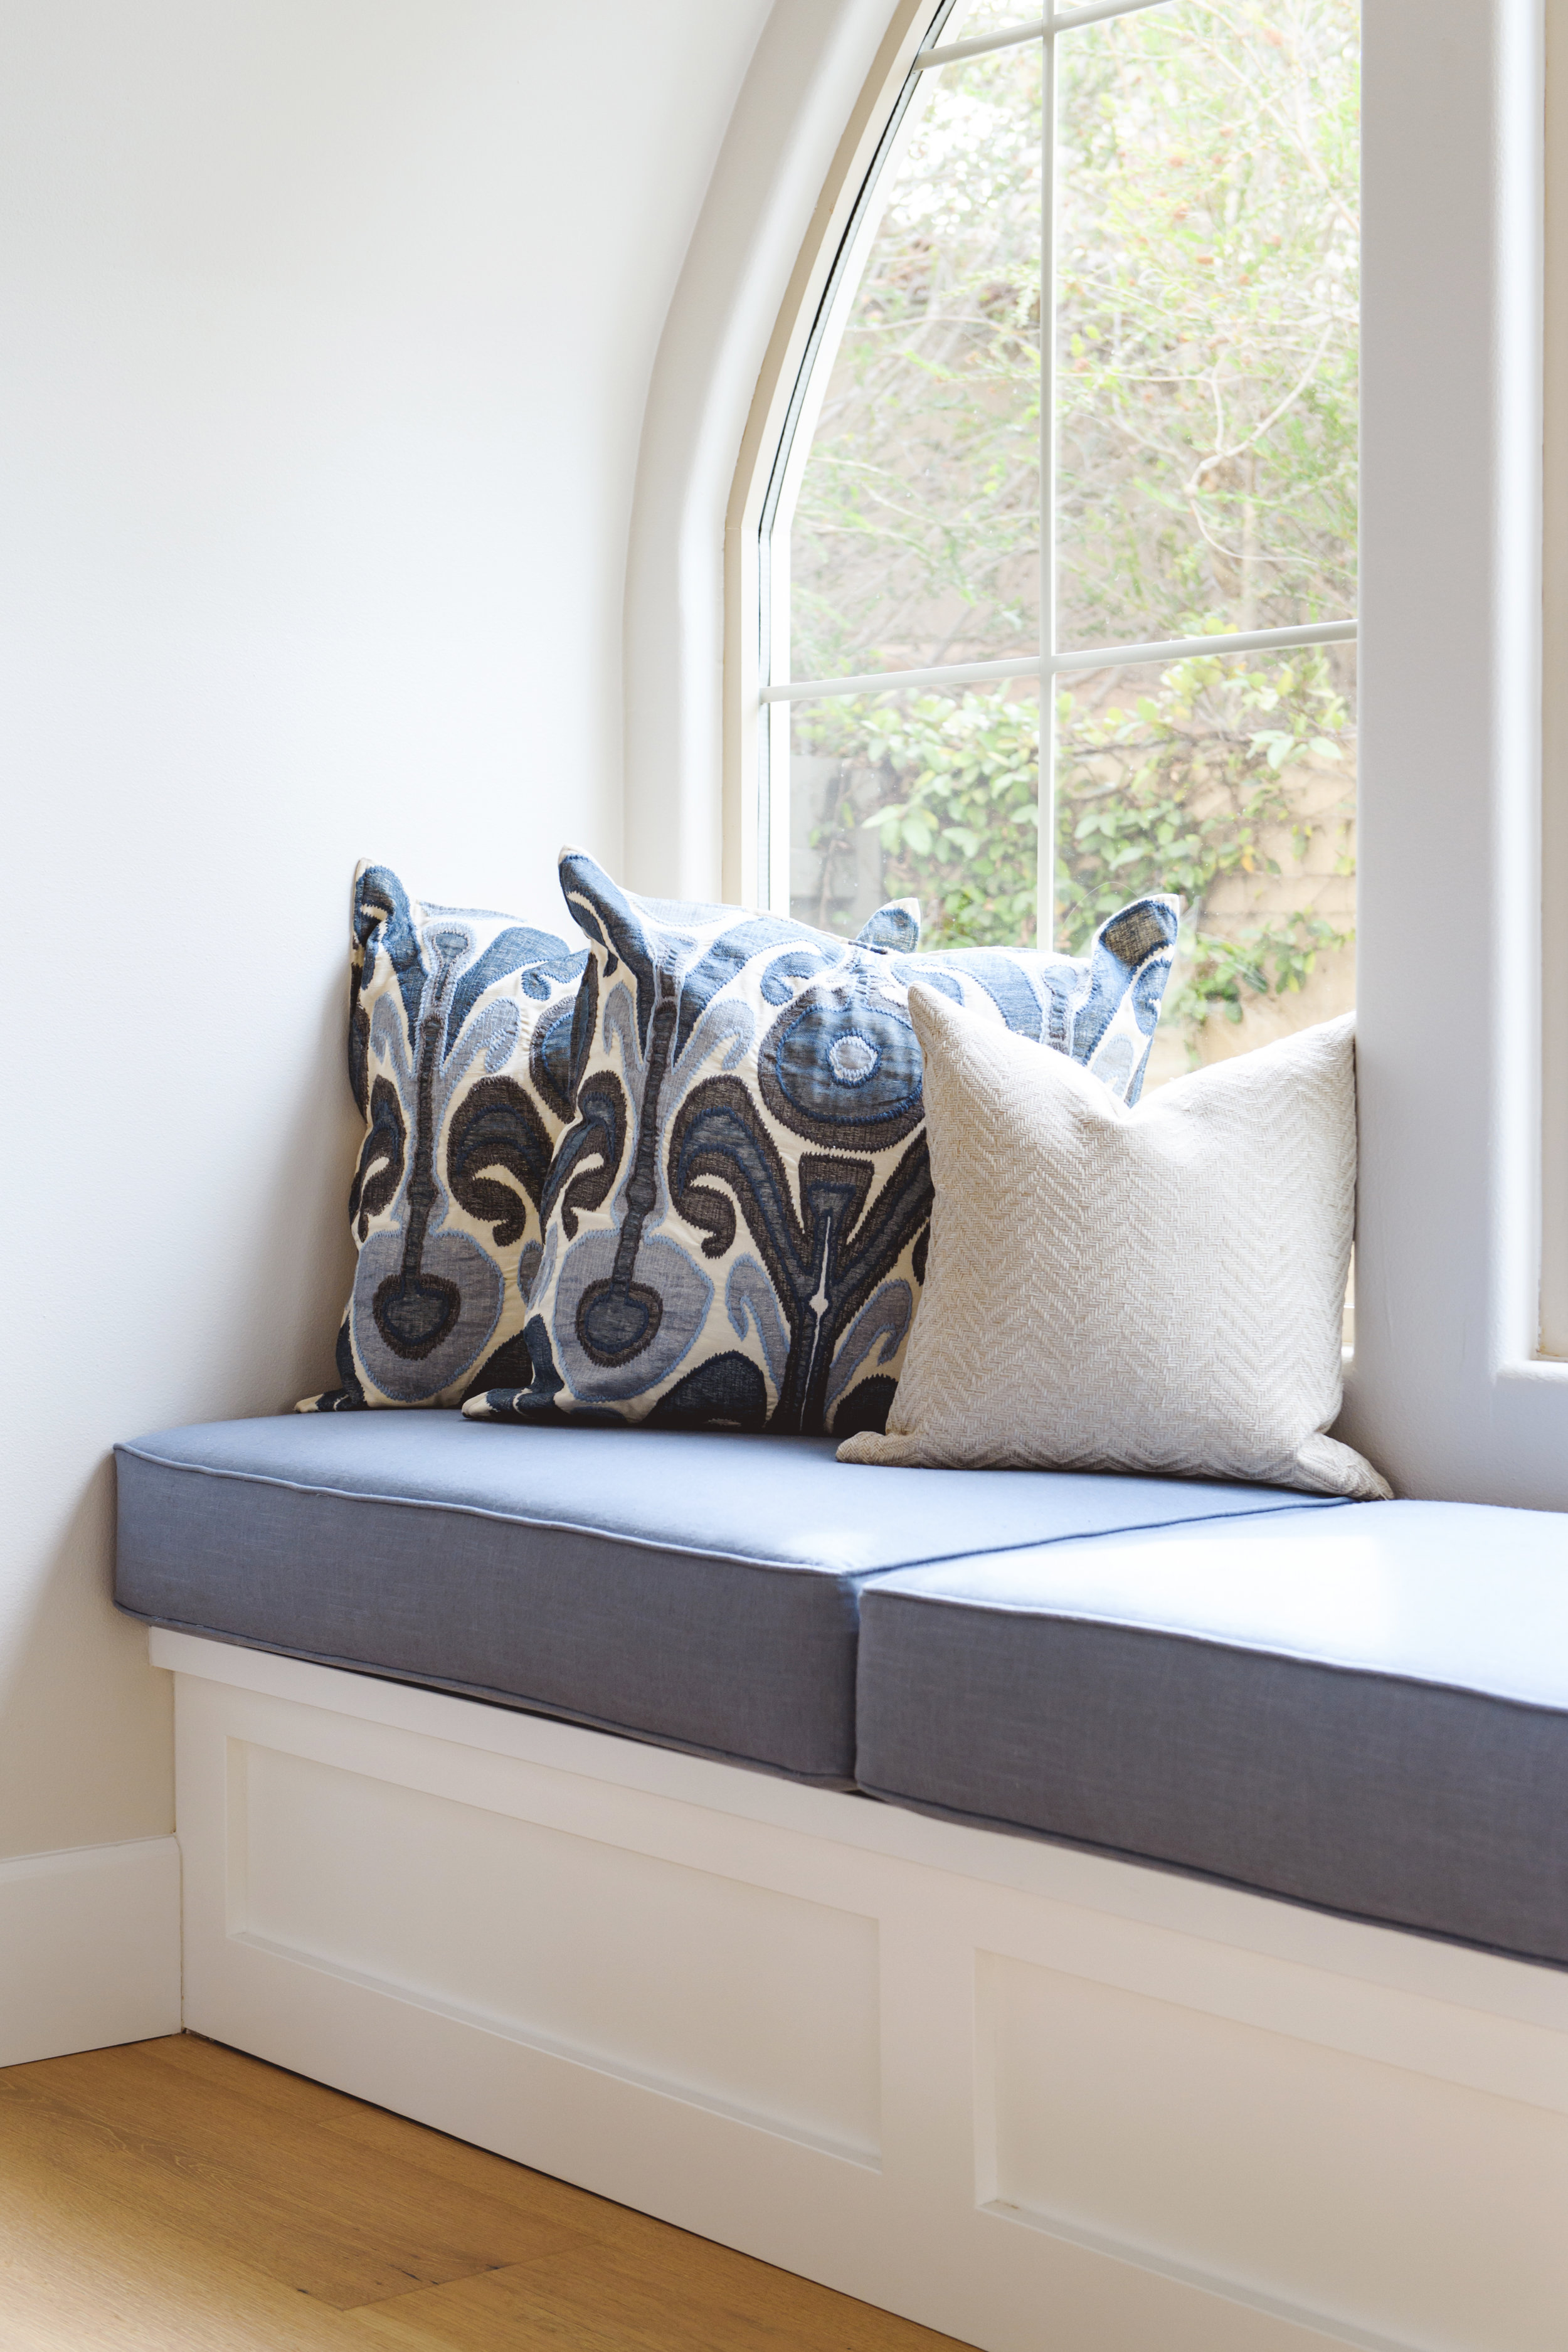 Built in Window Seat from Savvy Interiors